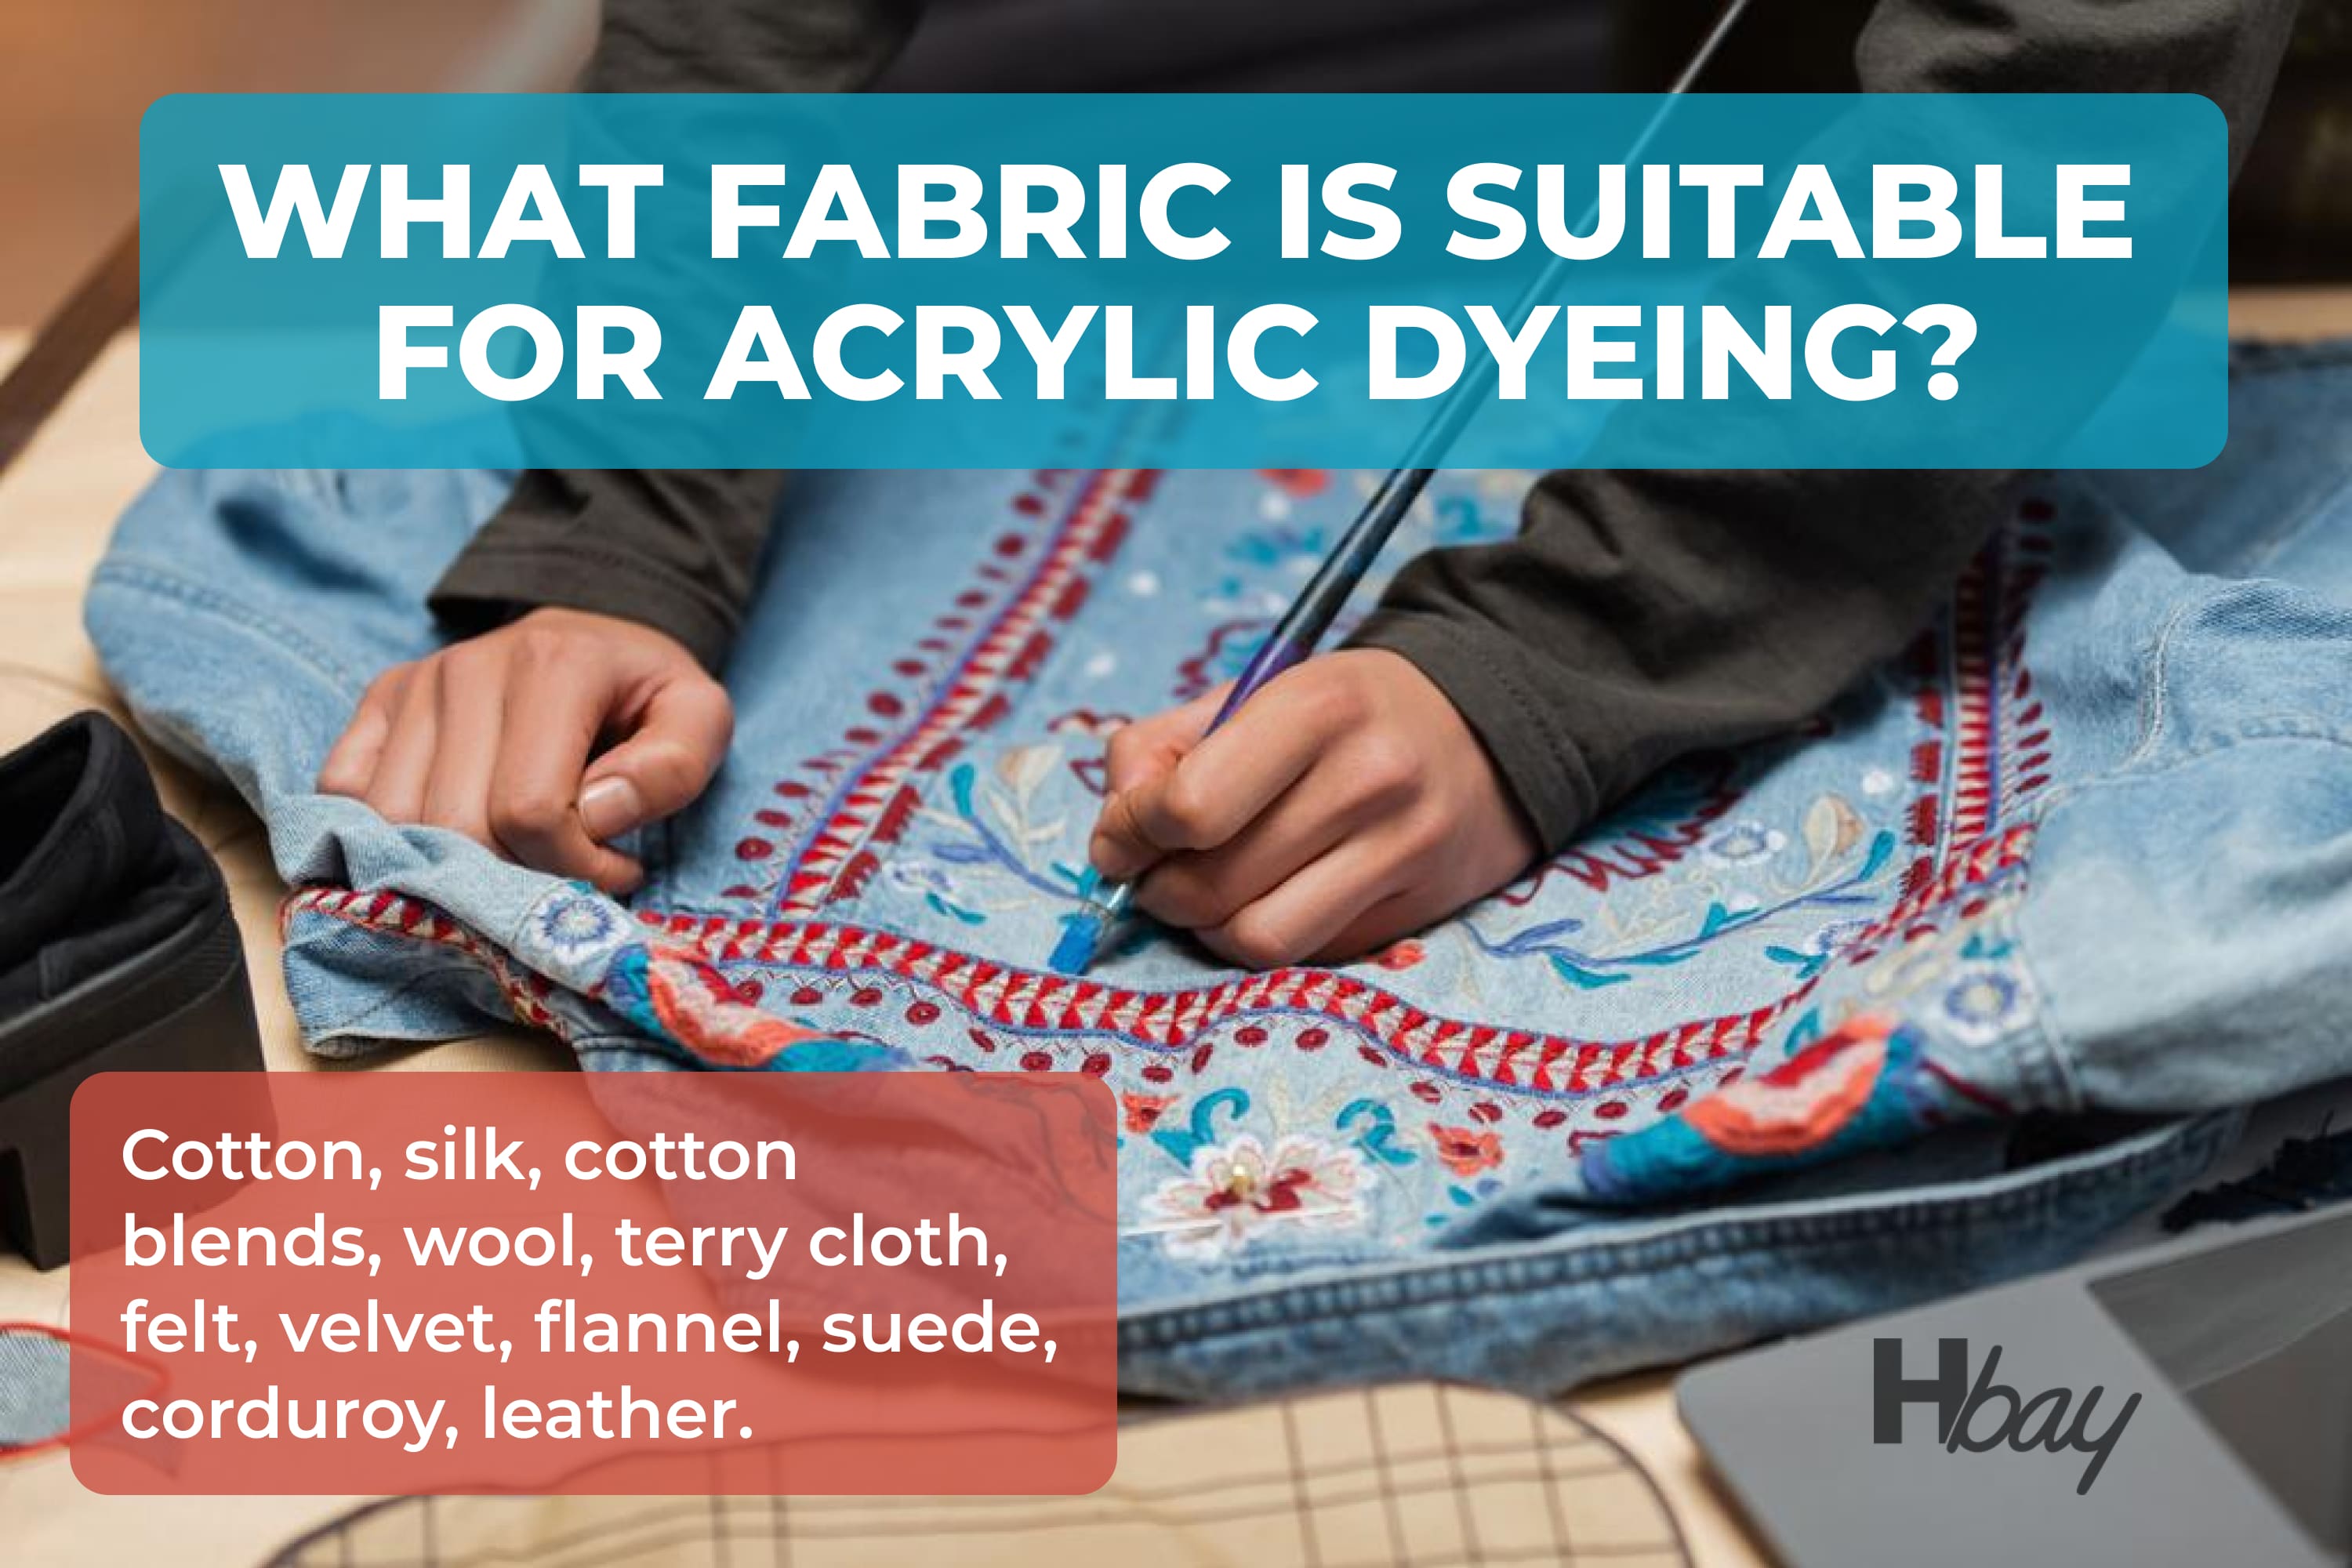 What fabric is suitable for acrylic dyeing